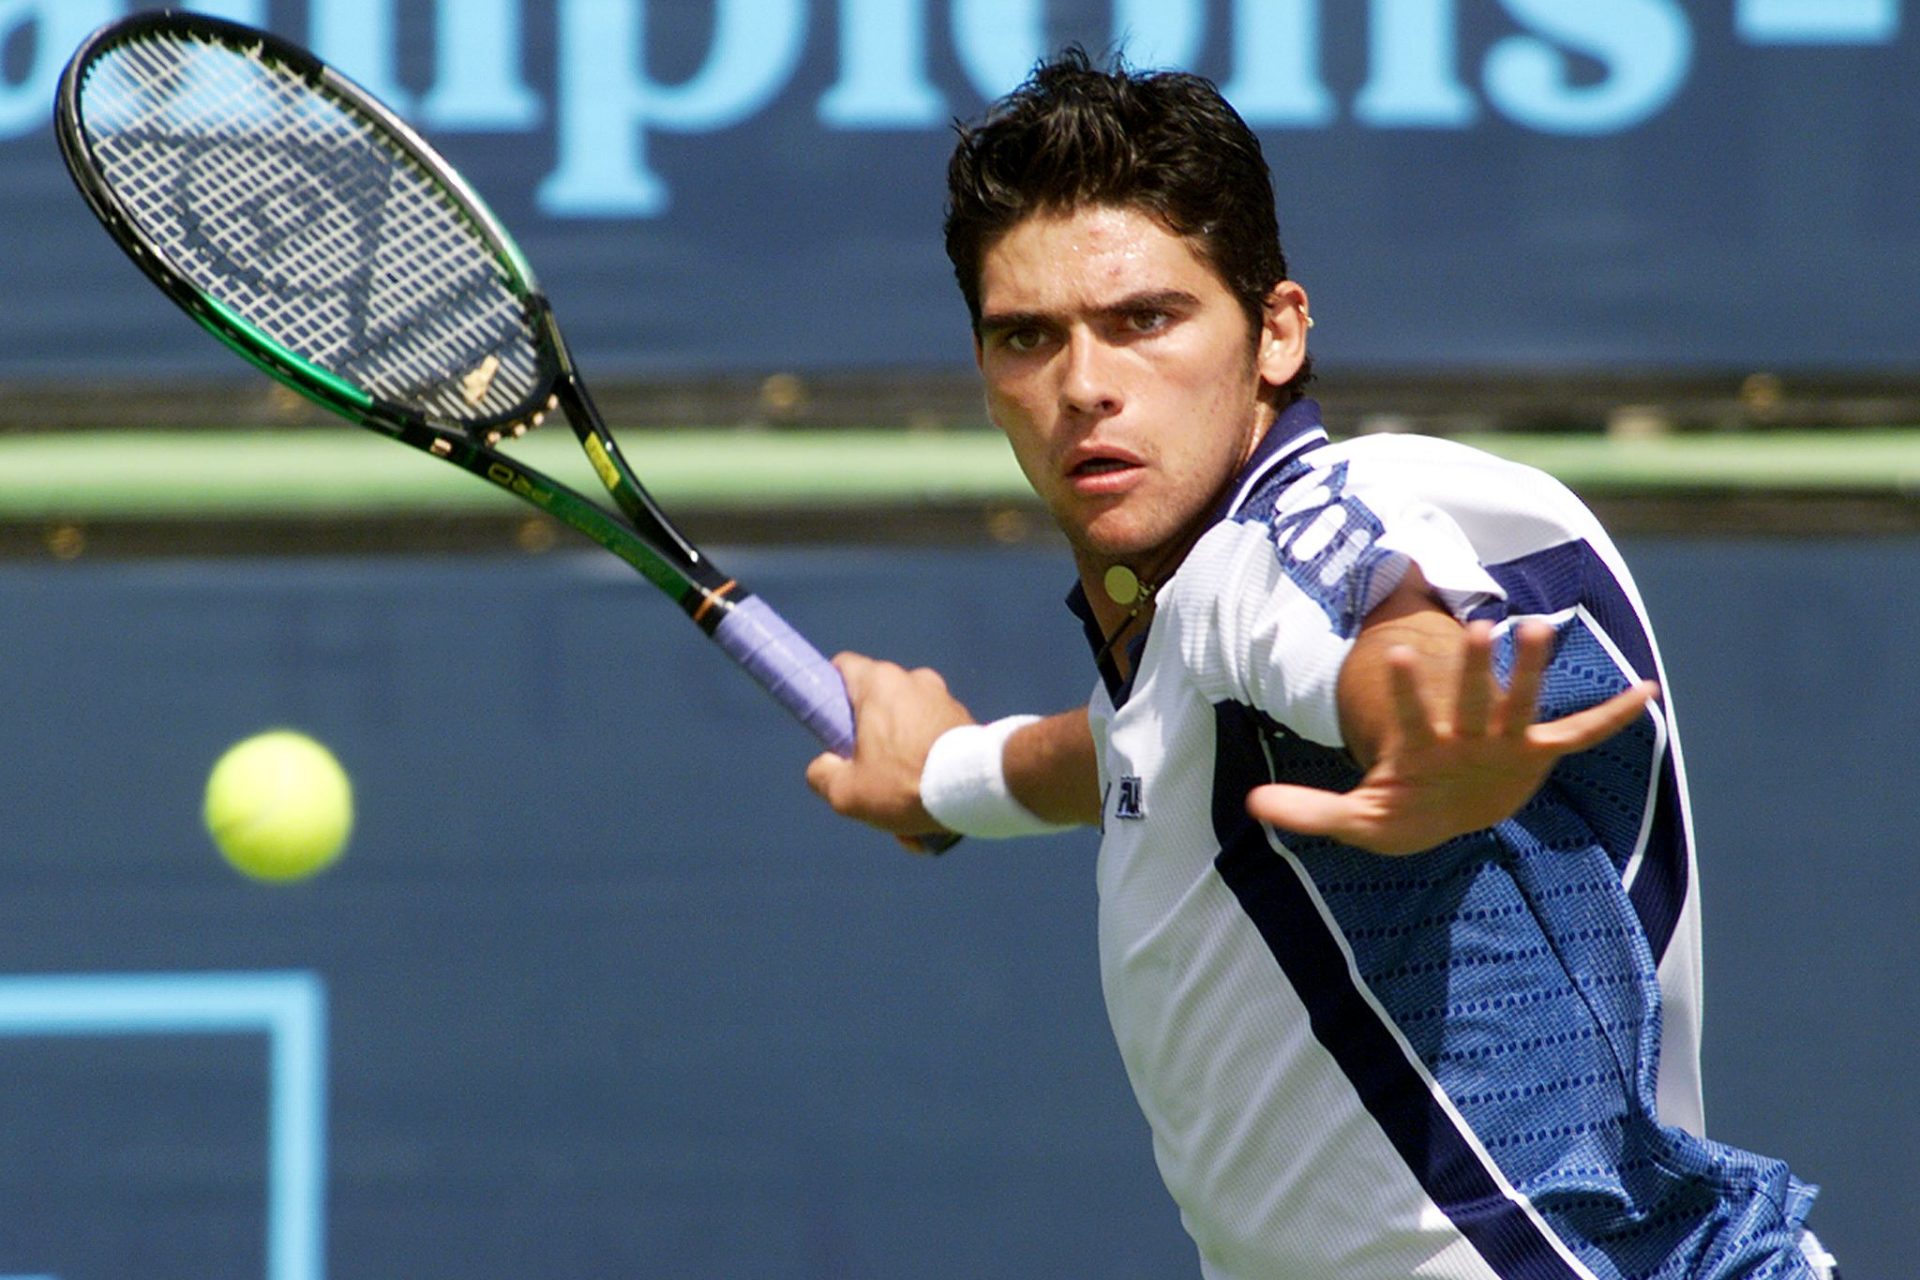 Grand Slam heartbreak, infidelity and financial disaster: What happened to Mark Philippoussis?